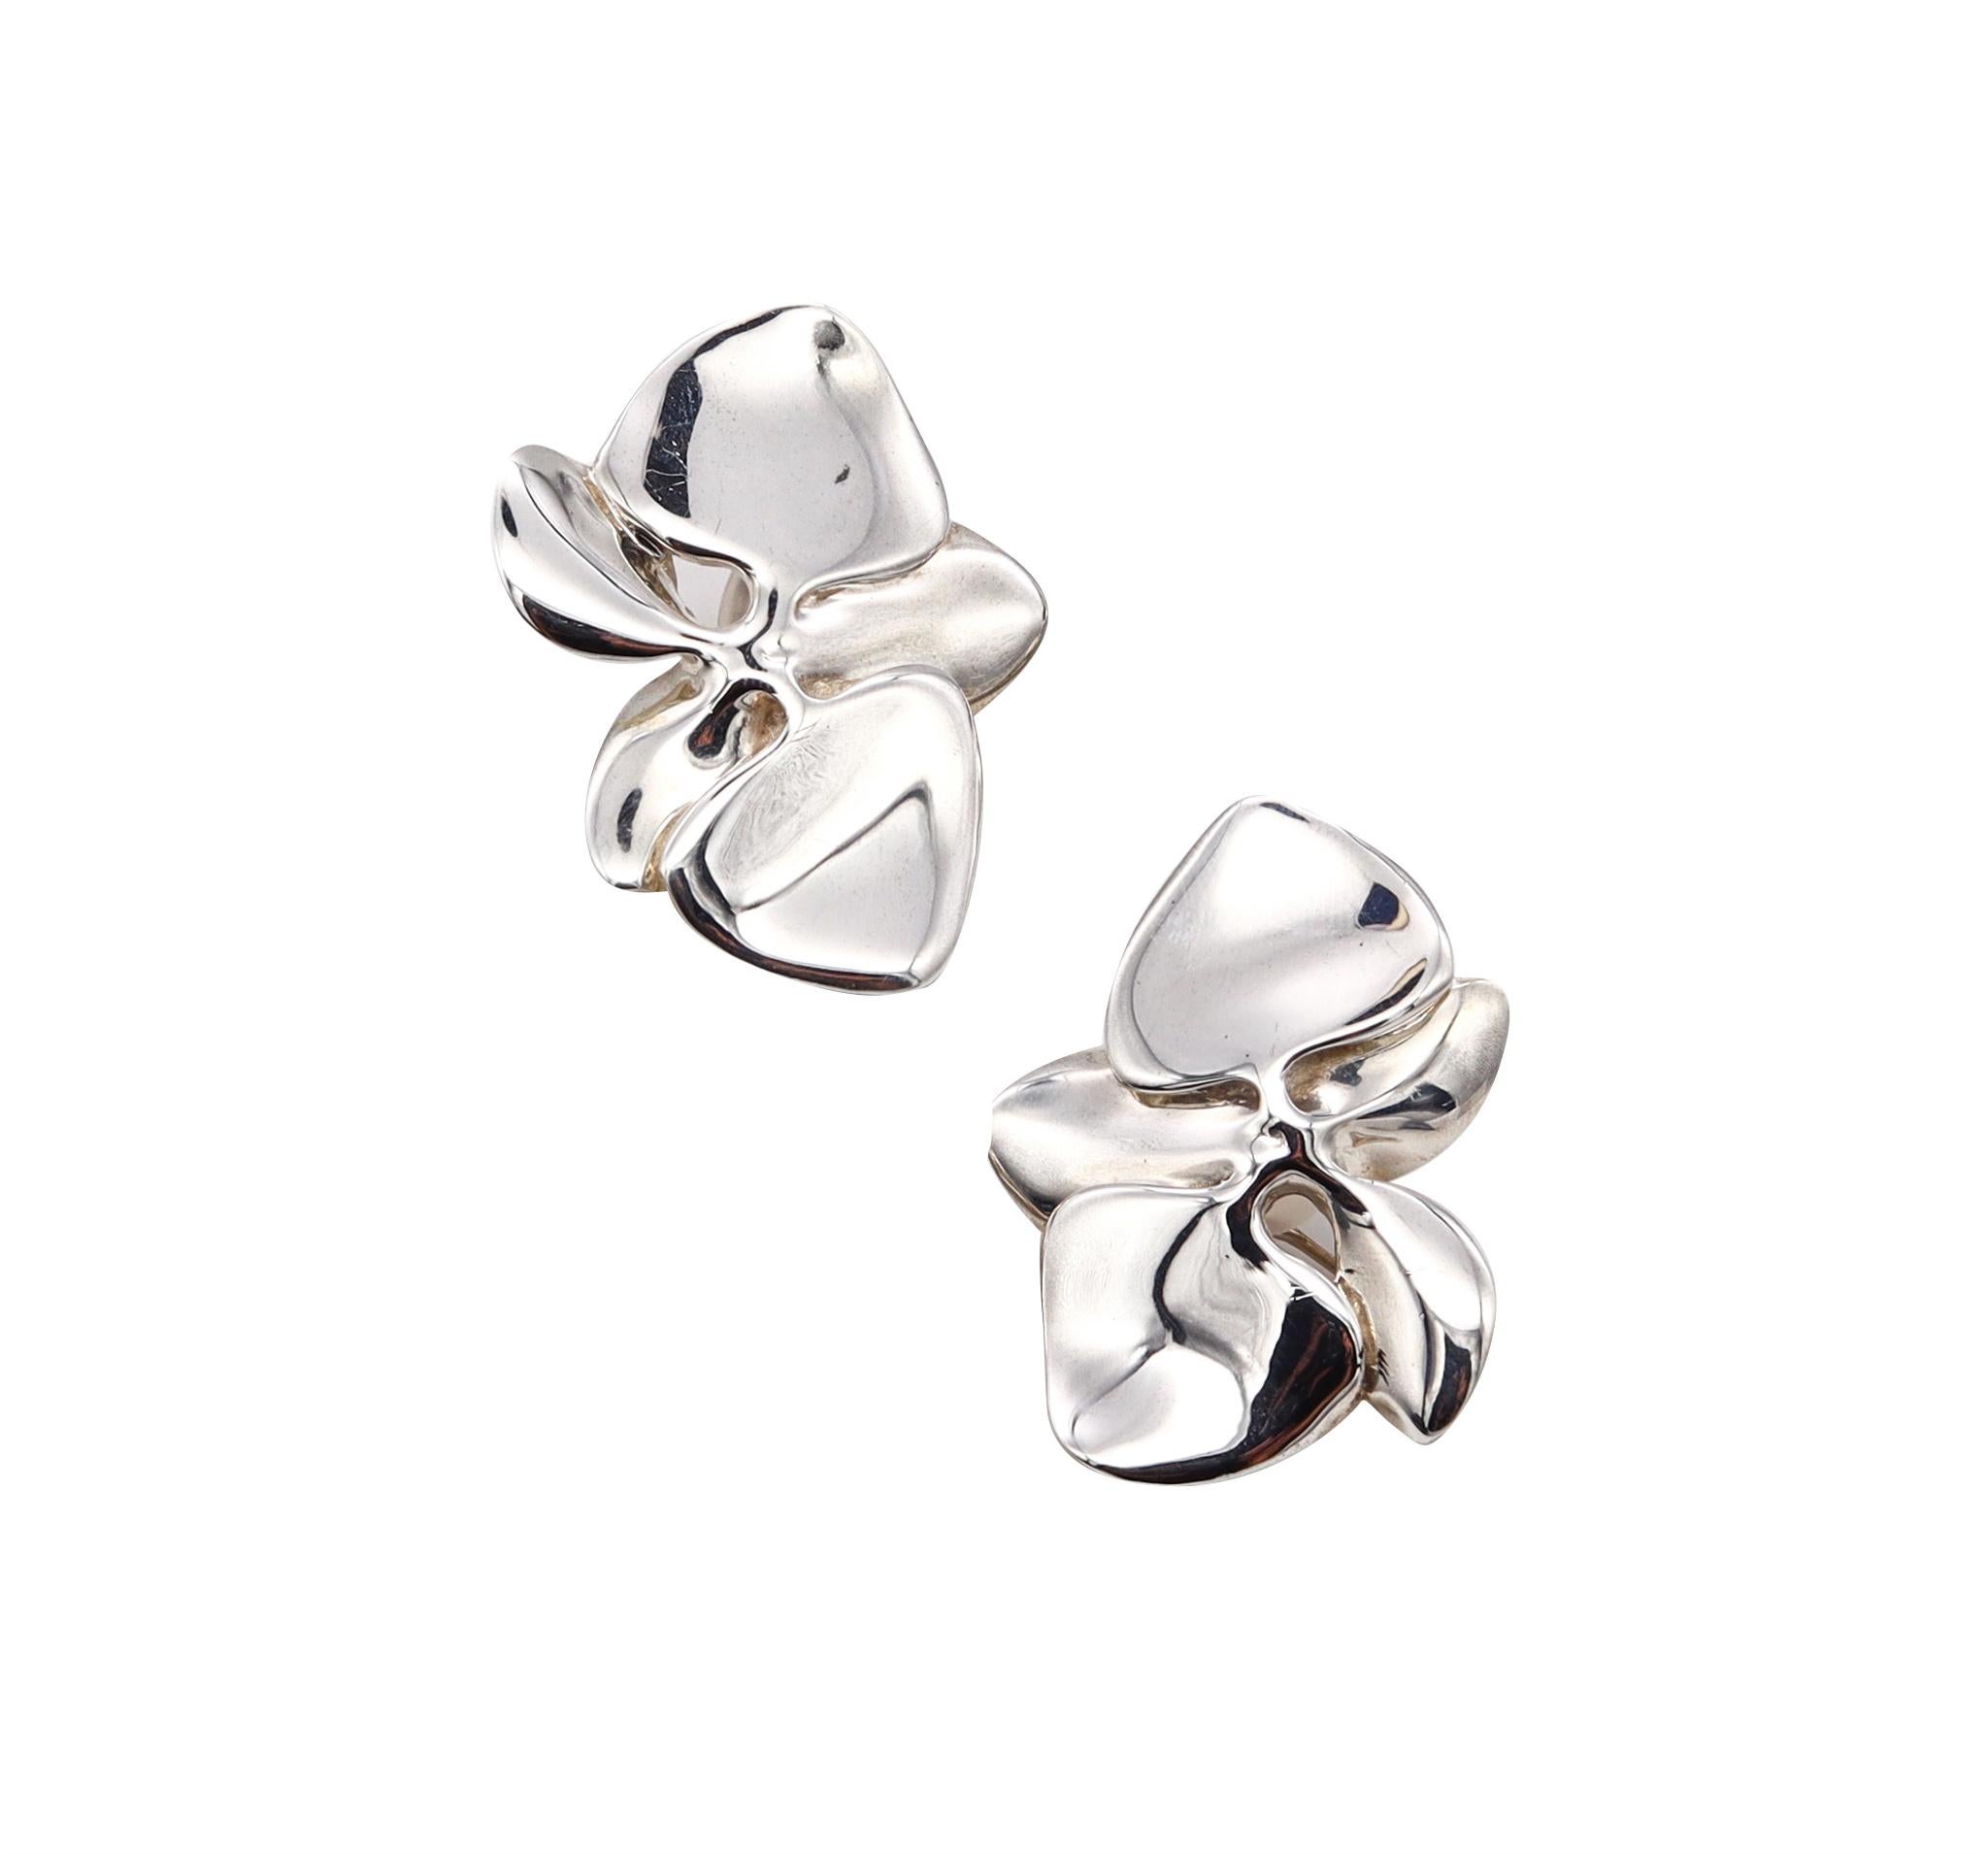 Orchids Earrings designed by Angela Cummings.

An over-sized organic sculptural piece, created in New York city by Angela Cummings back in the 1984. This pair of earrings was carefully crafted at her own studio in solid sterling silver with very